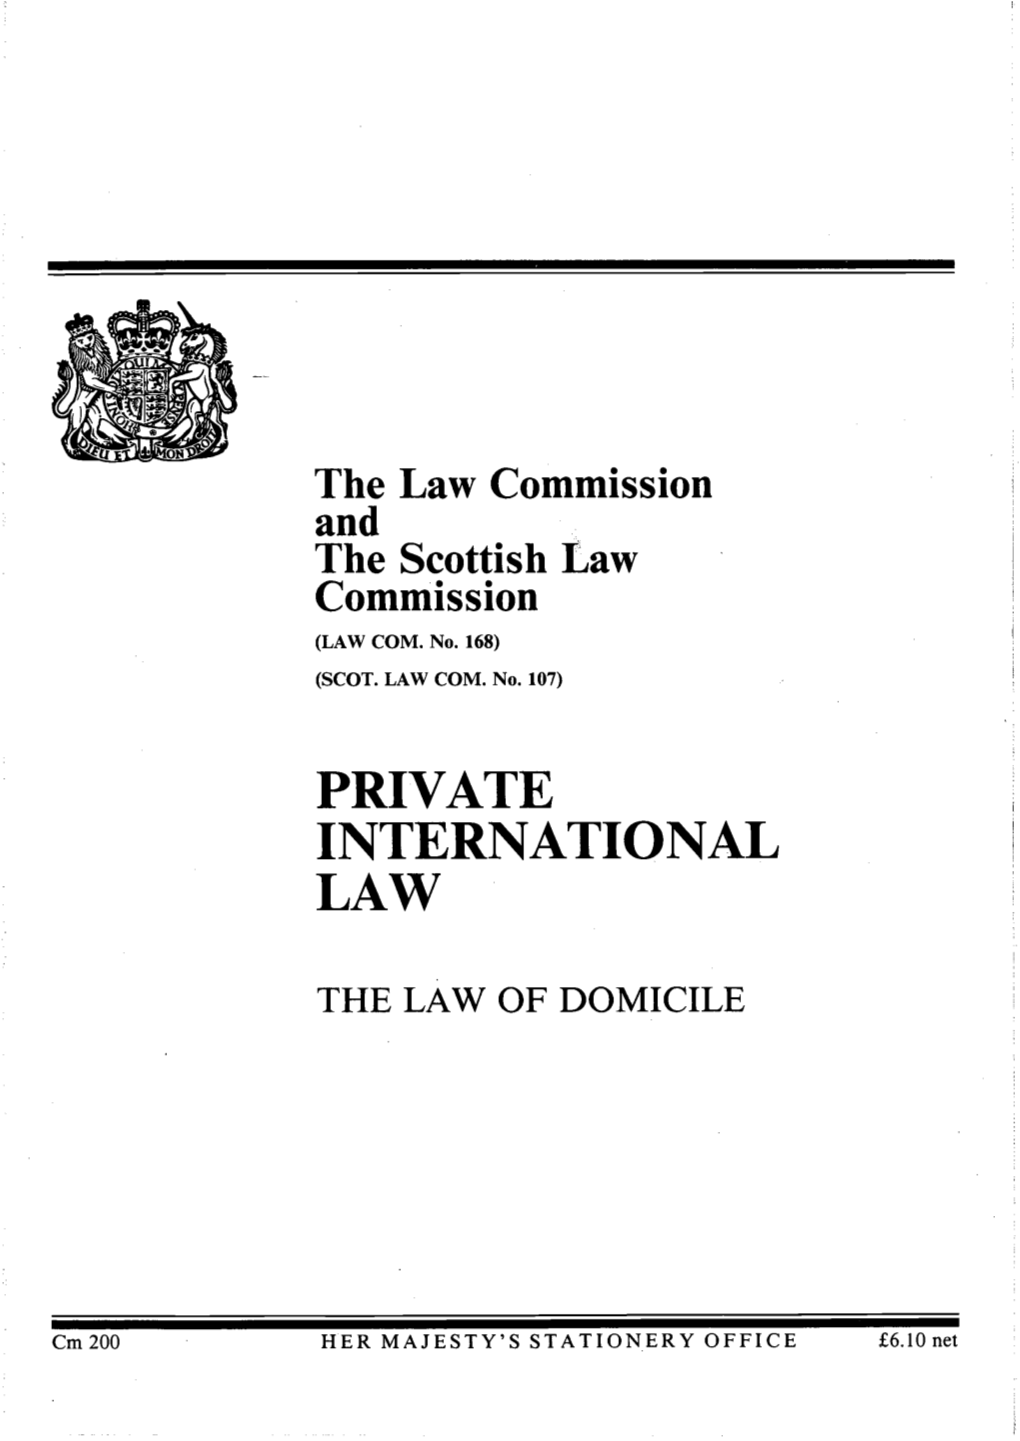 Private International Law: the Law of Domicile